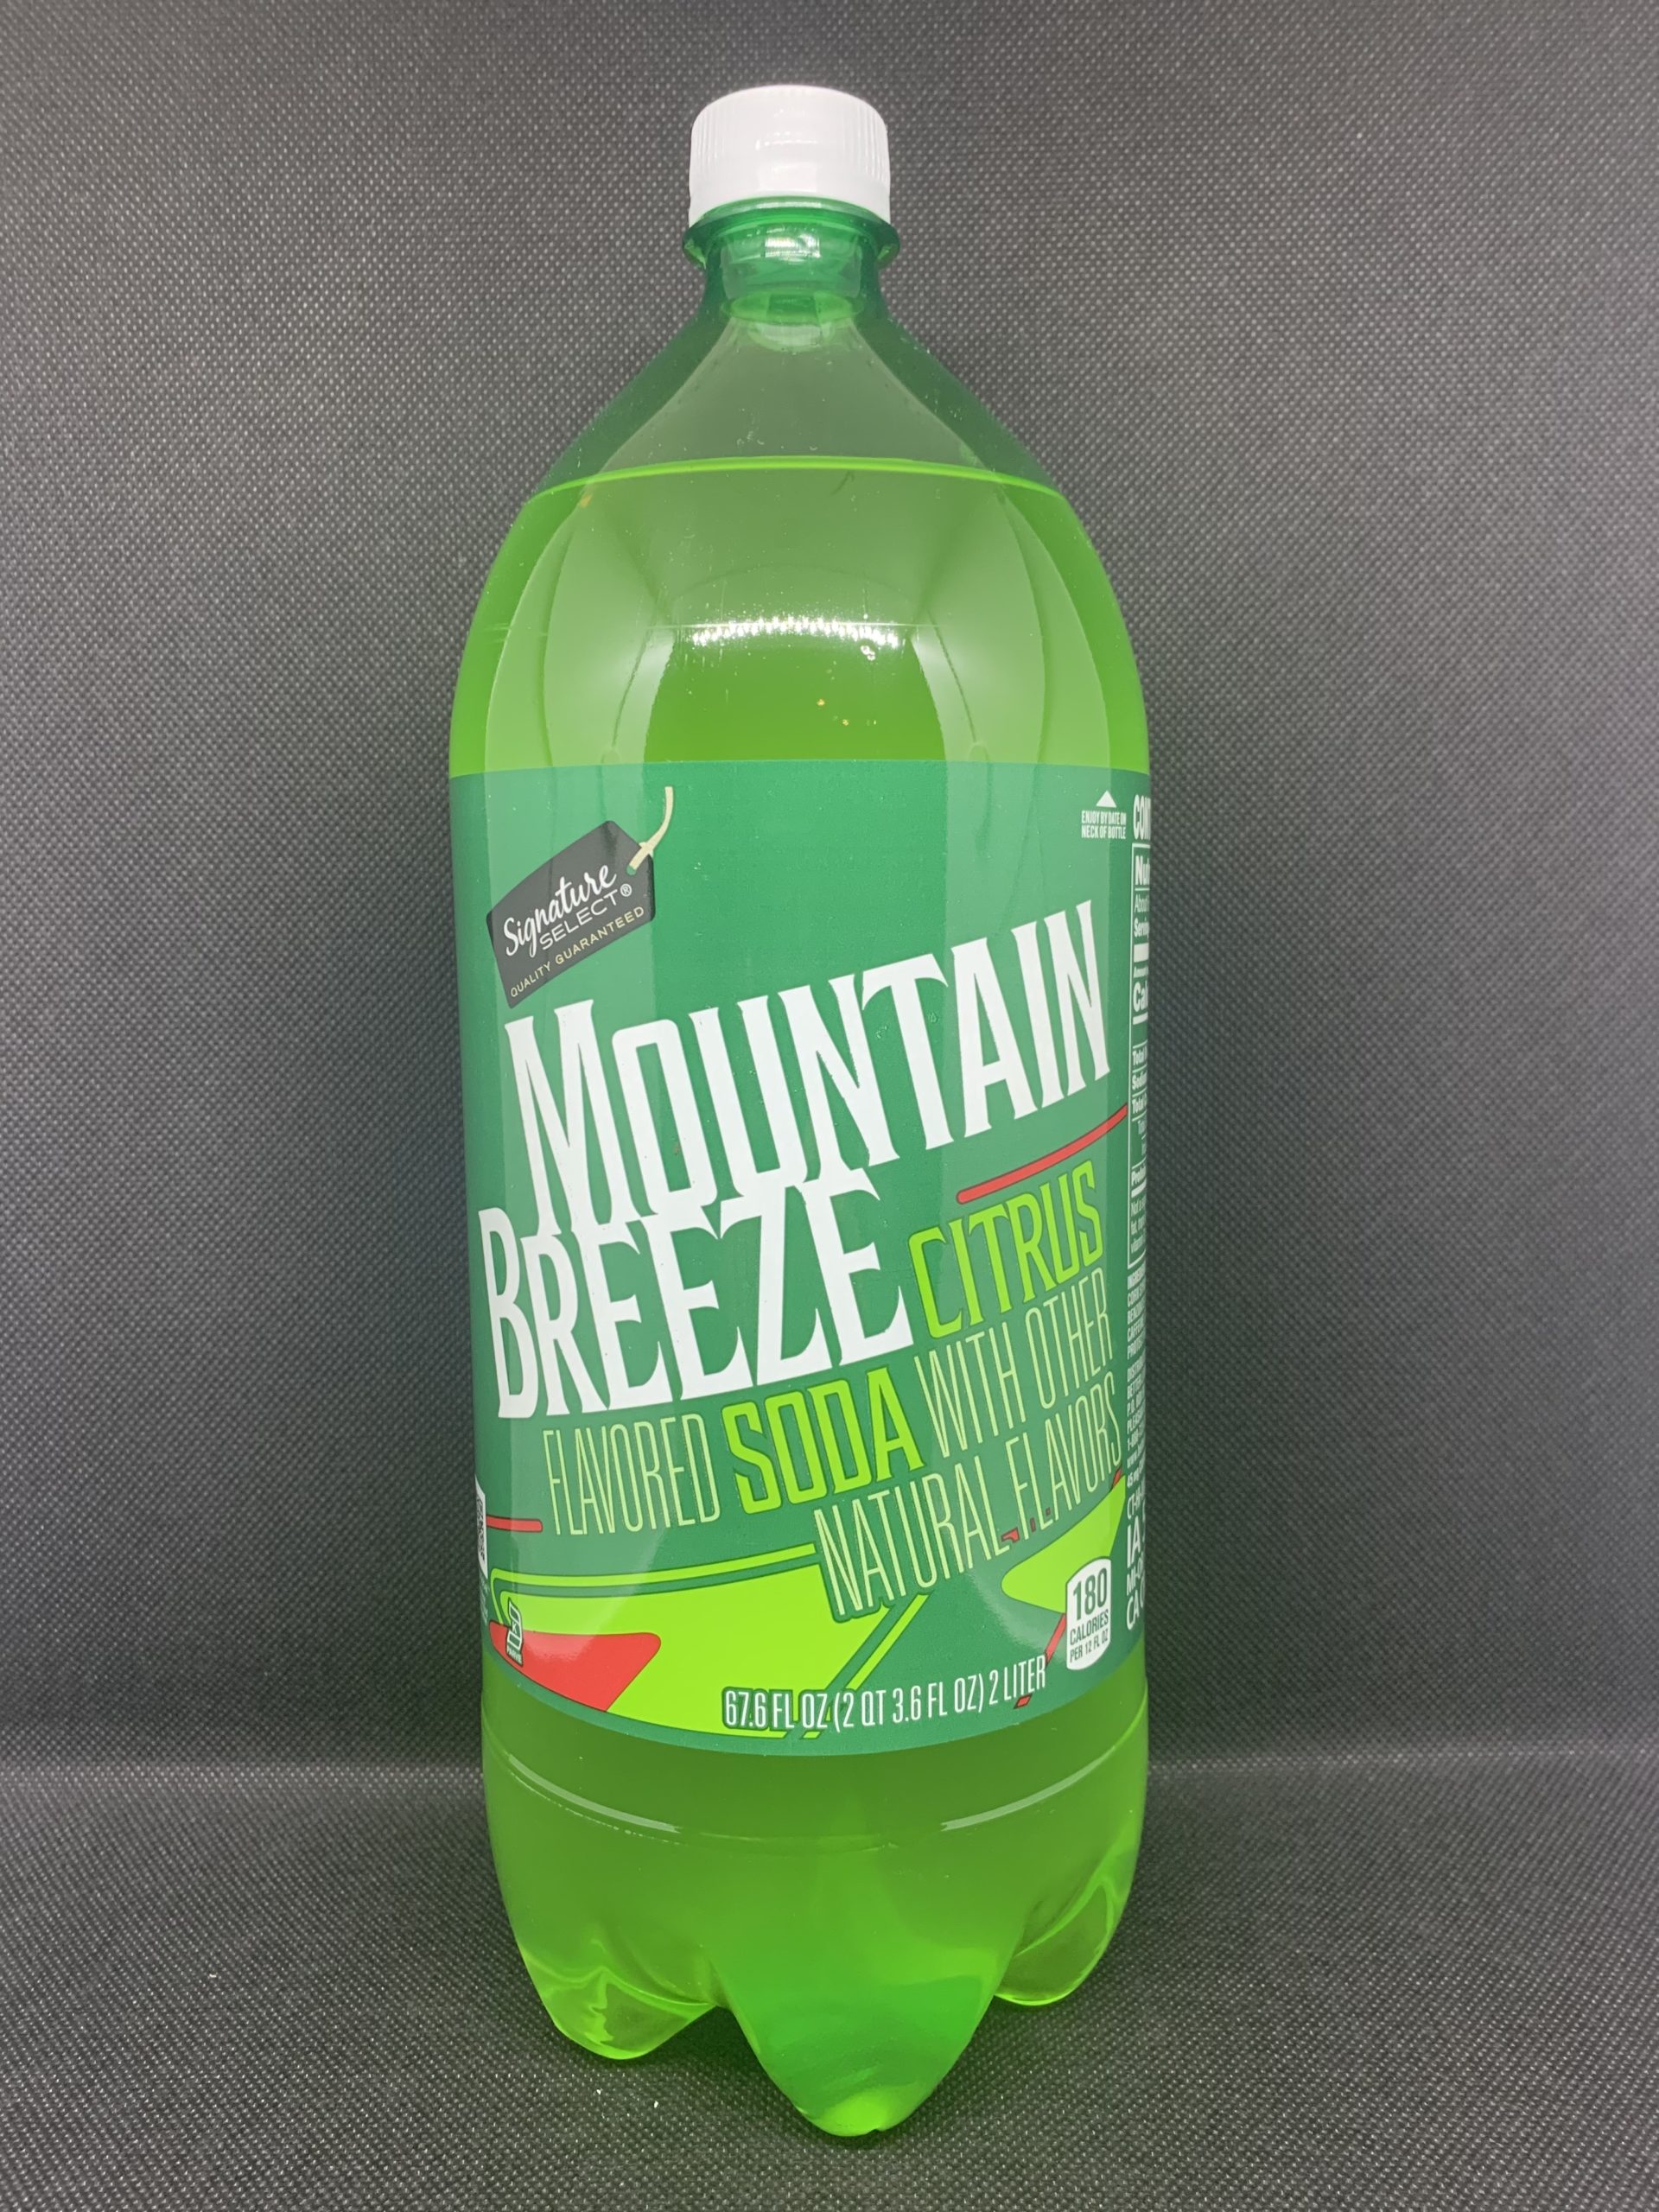 Off Brand Mountain Dew Review | The Off Brand Guy